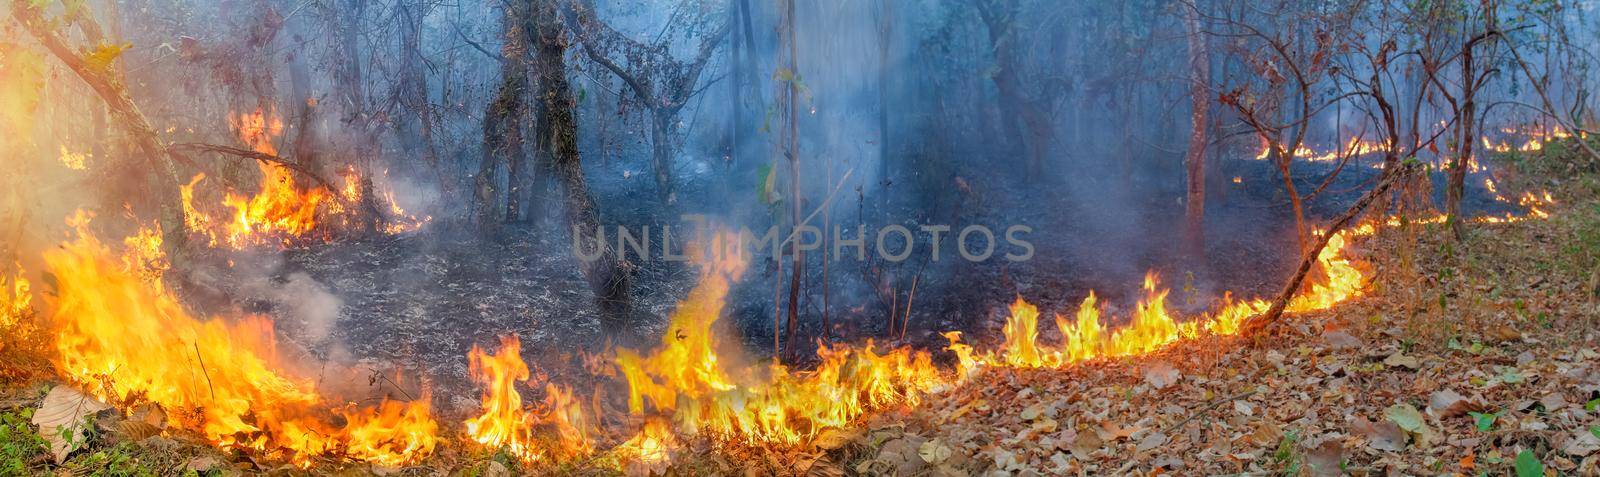 African forest fires in the Congo Basin ,Central Africa by toa55